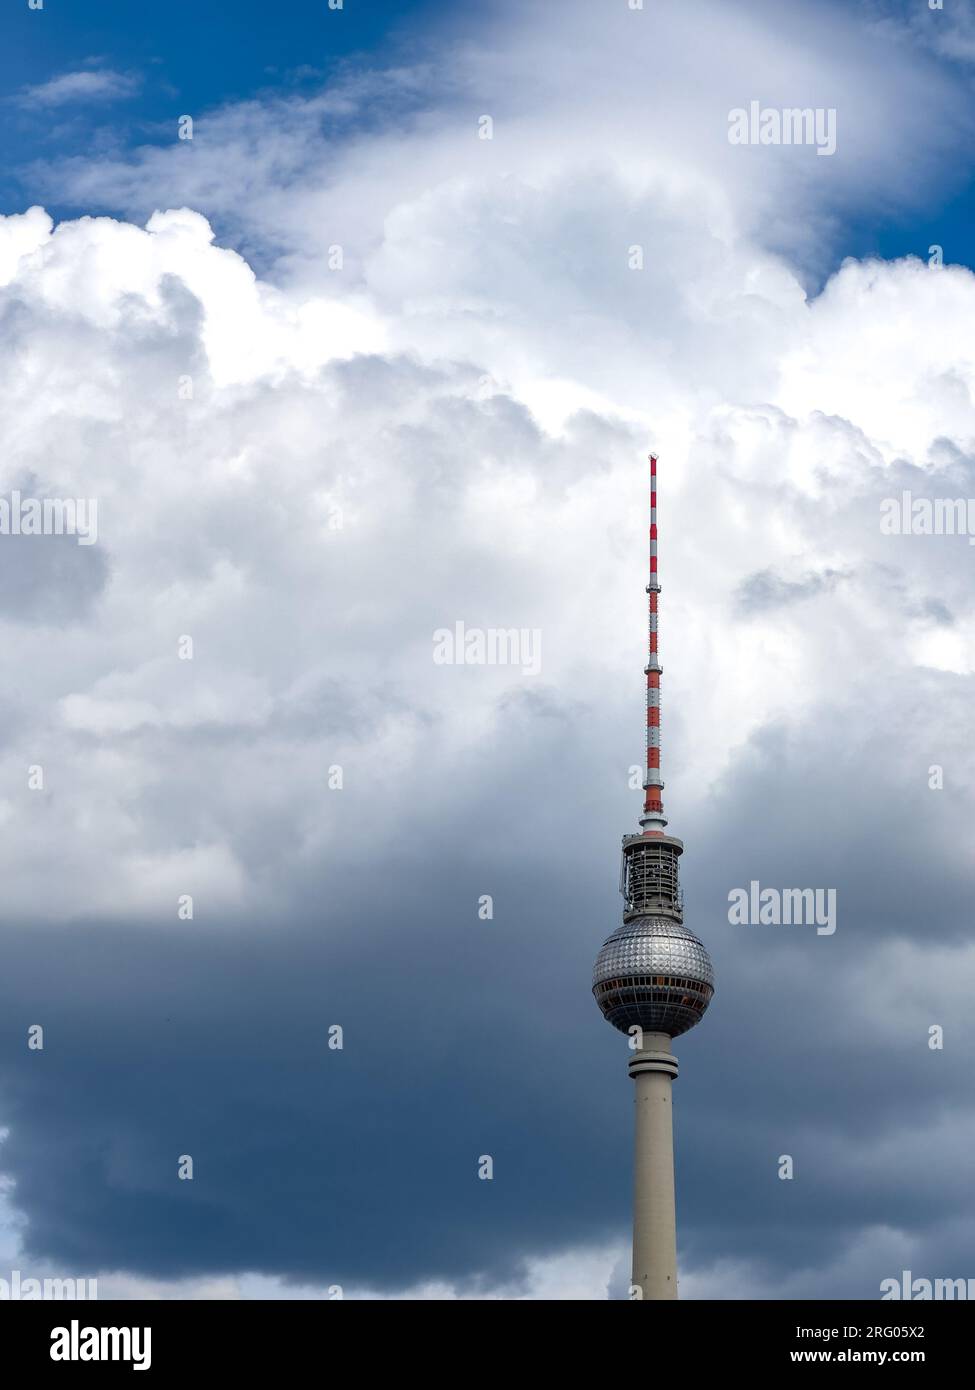 BERLIN, GERMANY - JULY 22, 2023: Alexanderplatz TV tower on the beautiful blue sky background with  clouds. Stock Photo